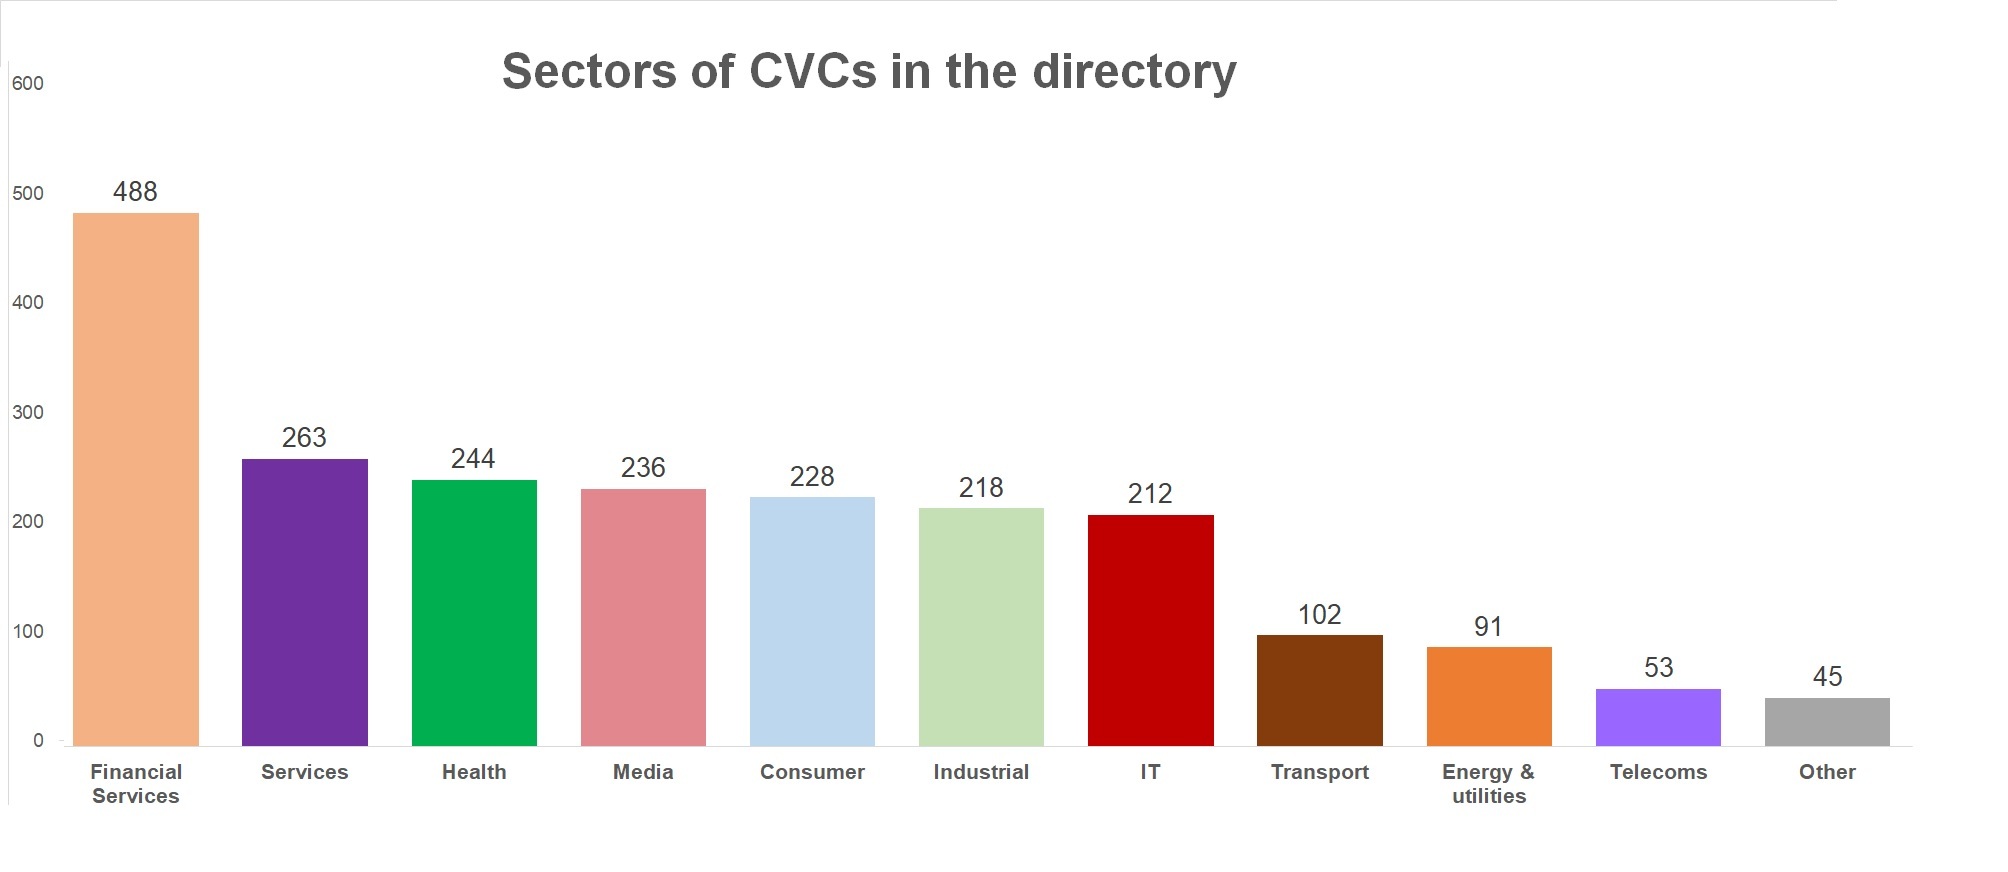 Sectors of CVCs in the directory